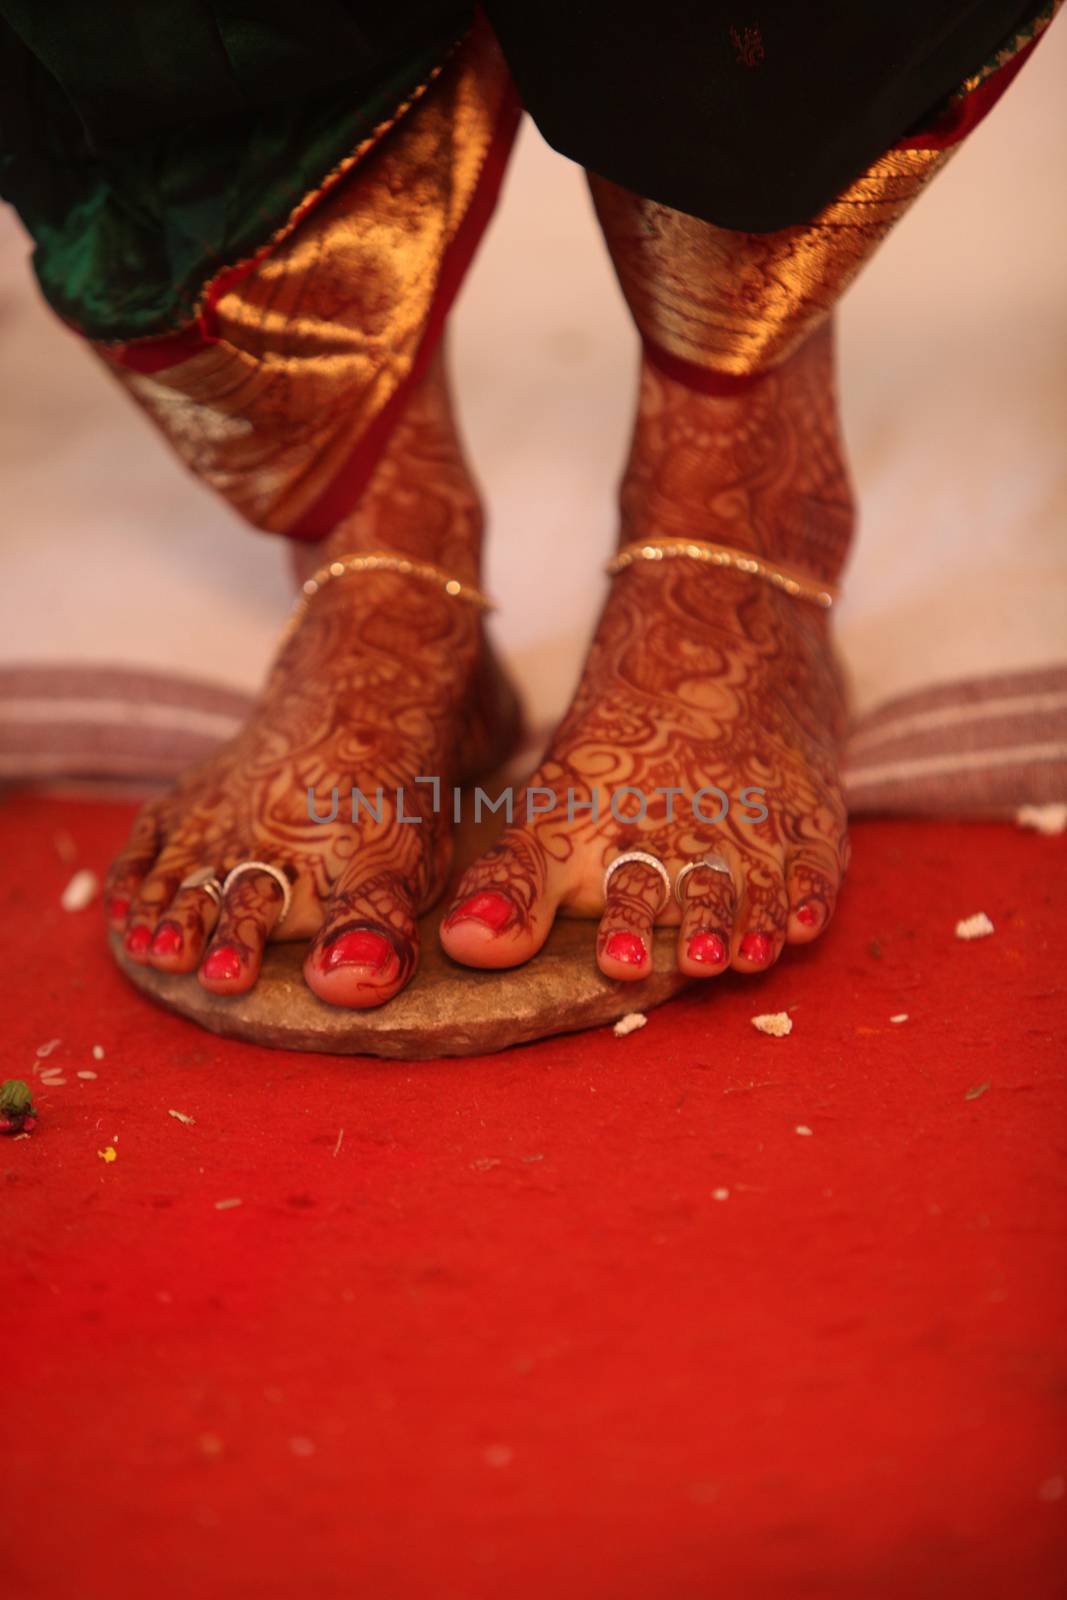 The feet of an Indian bride during the ritual in a traditional Hindu wedding.